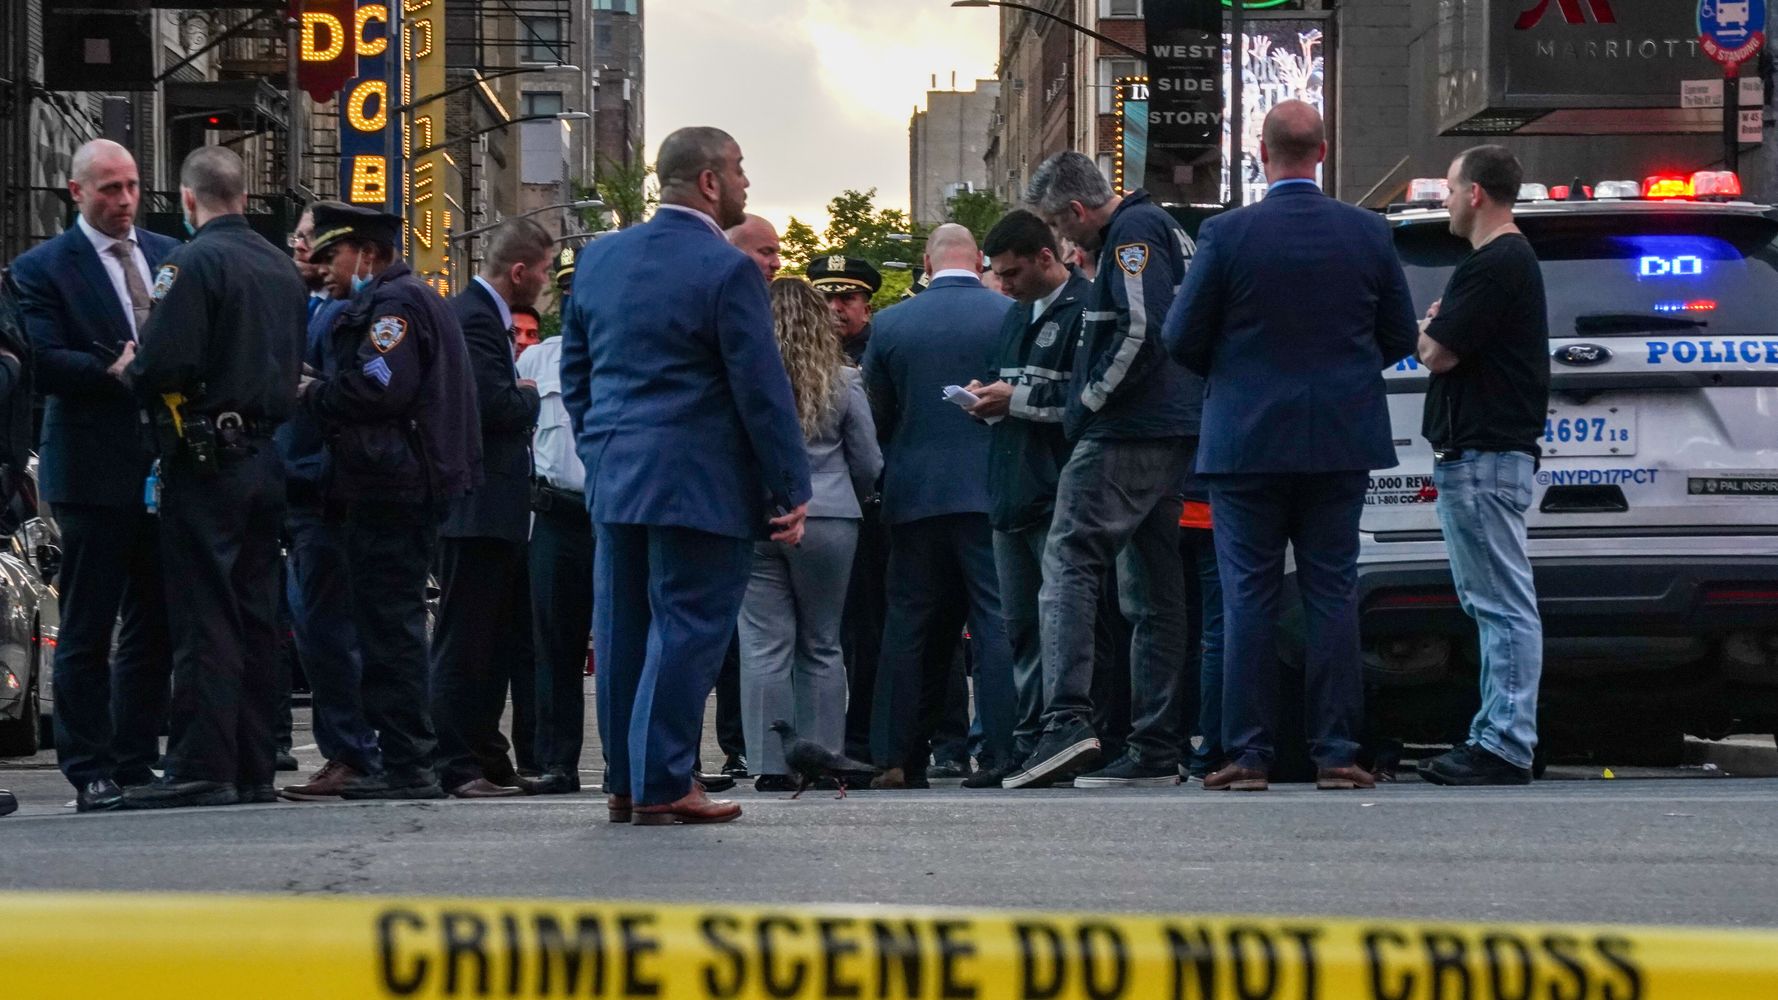 4-Year-Old Girl Among 3 Hit By Stray Bullets In NYC's Times Square